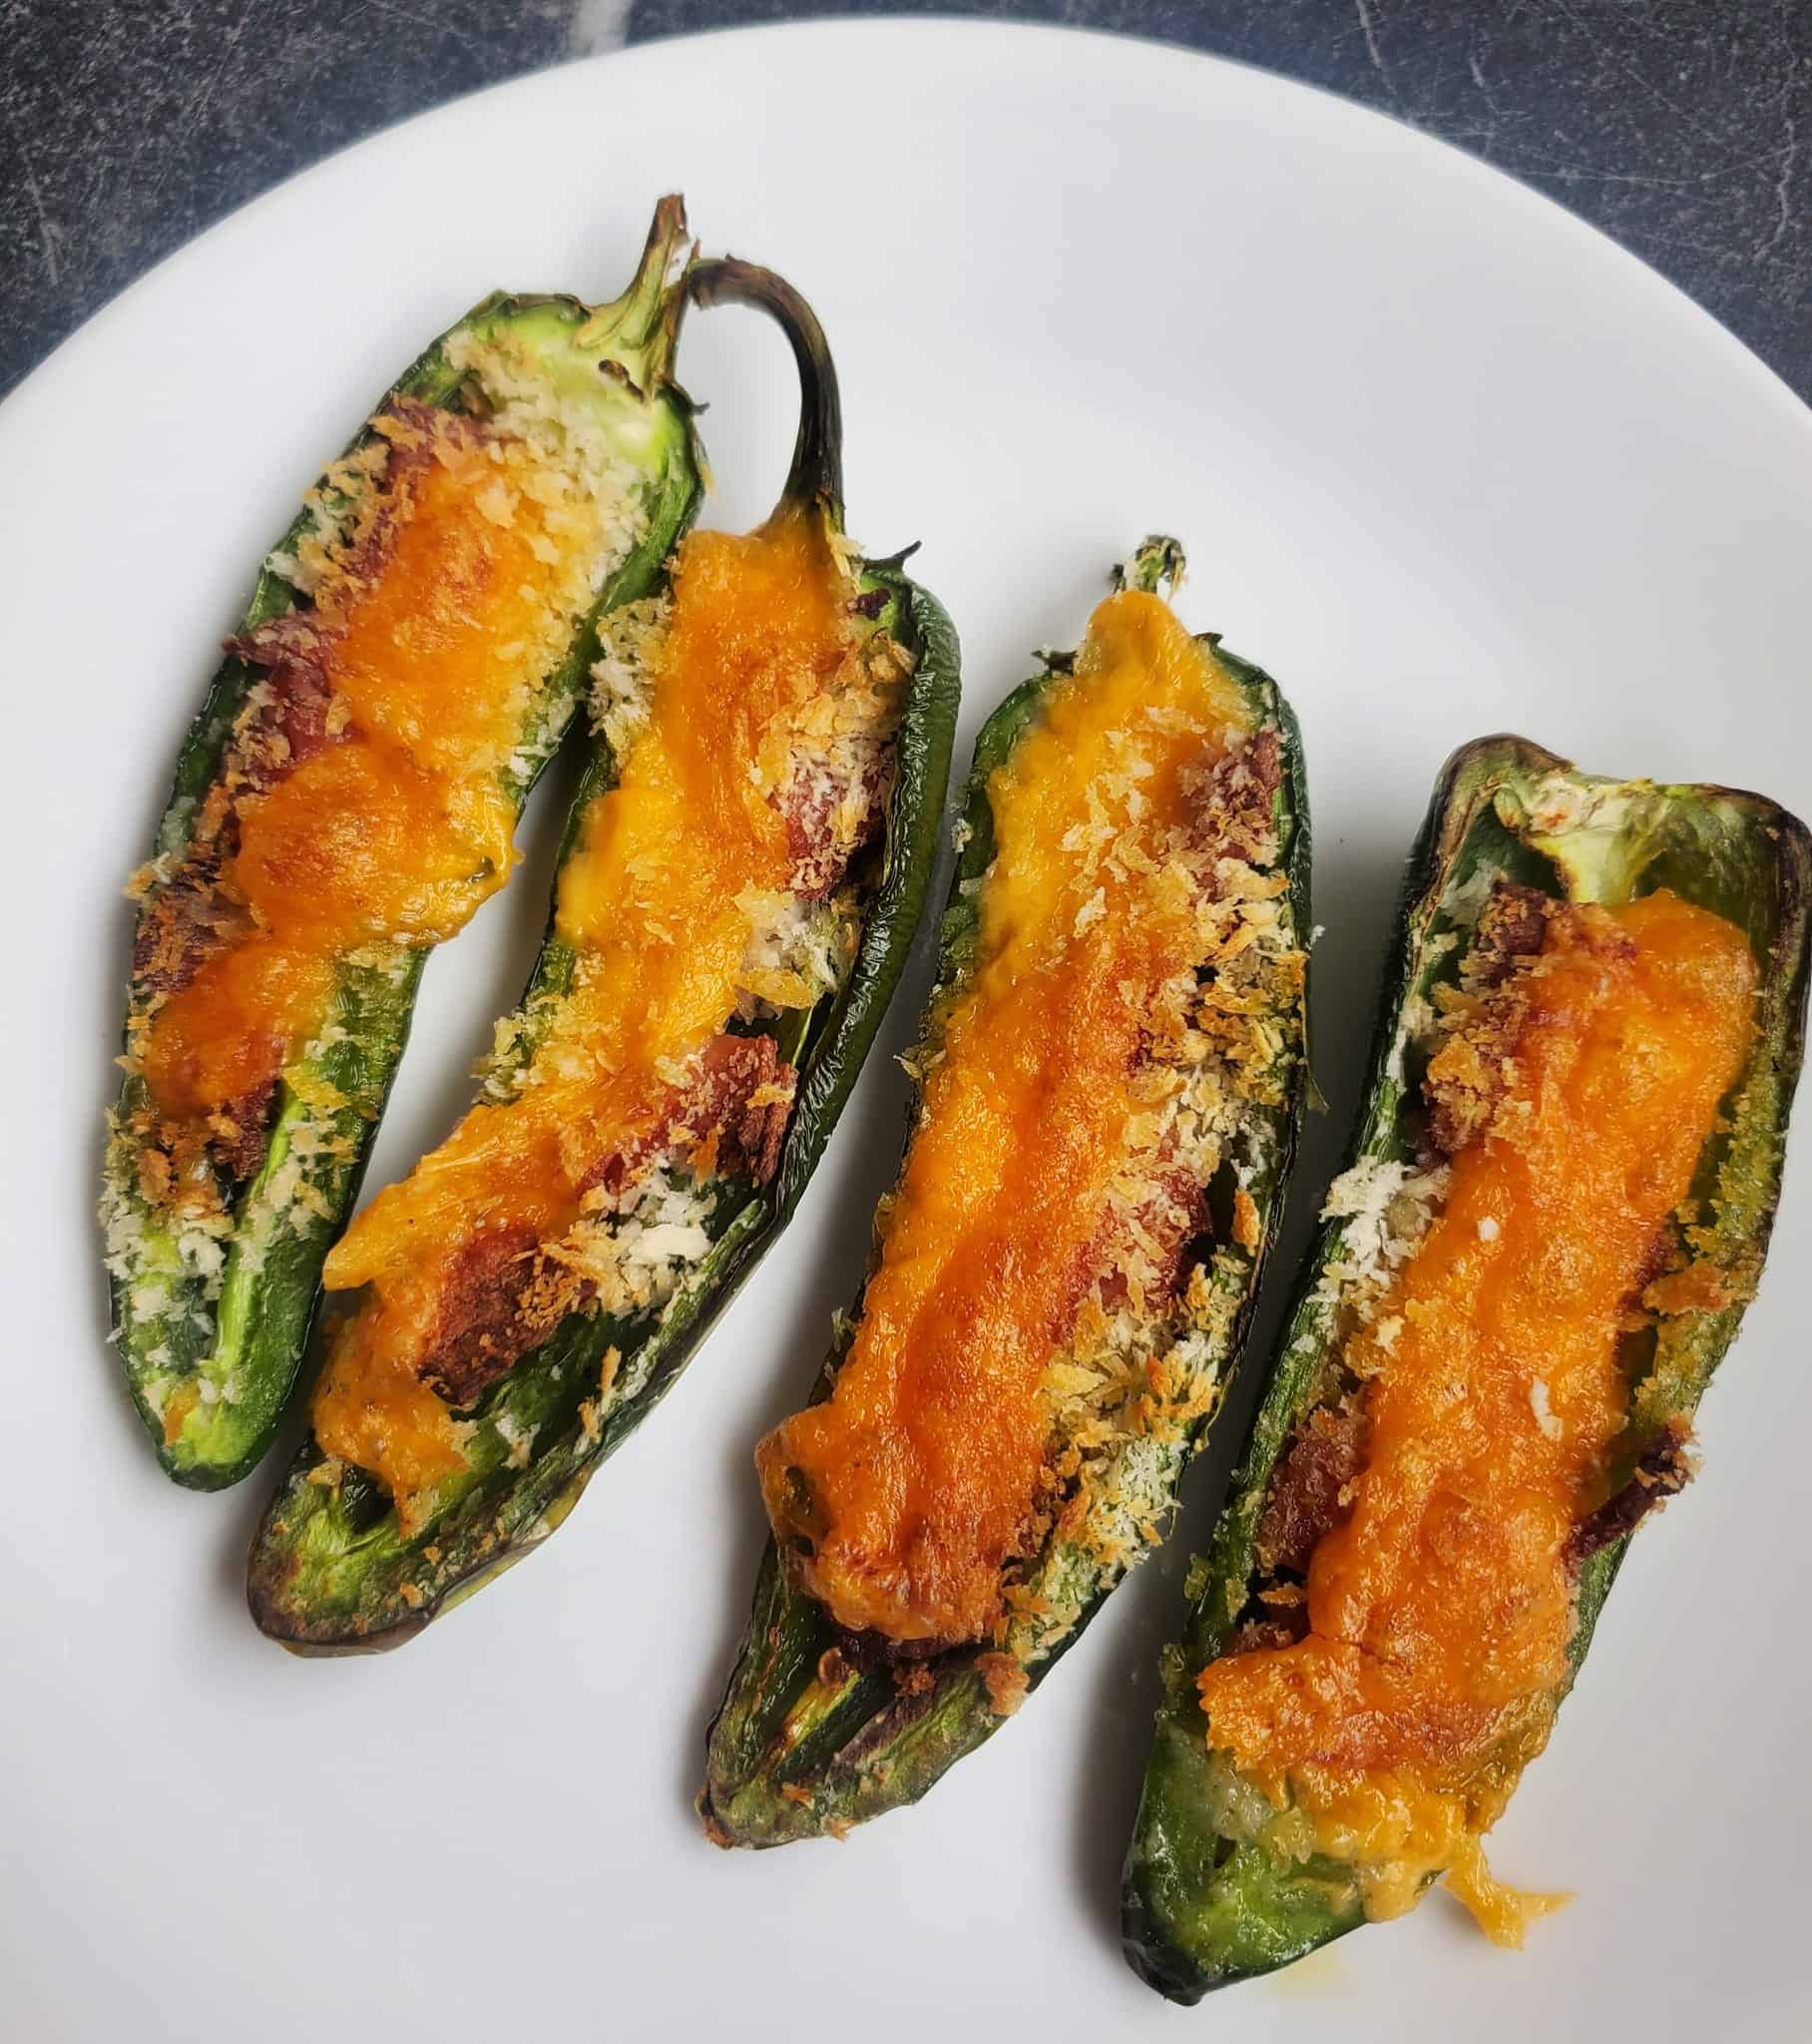 Jalapeno Poppers in Air fryer